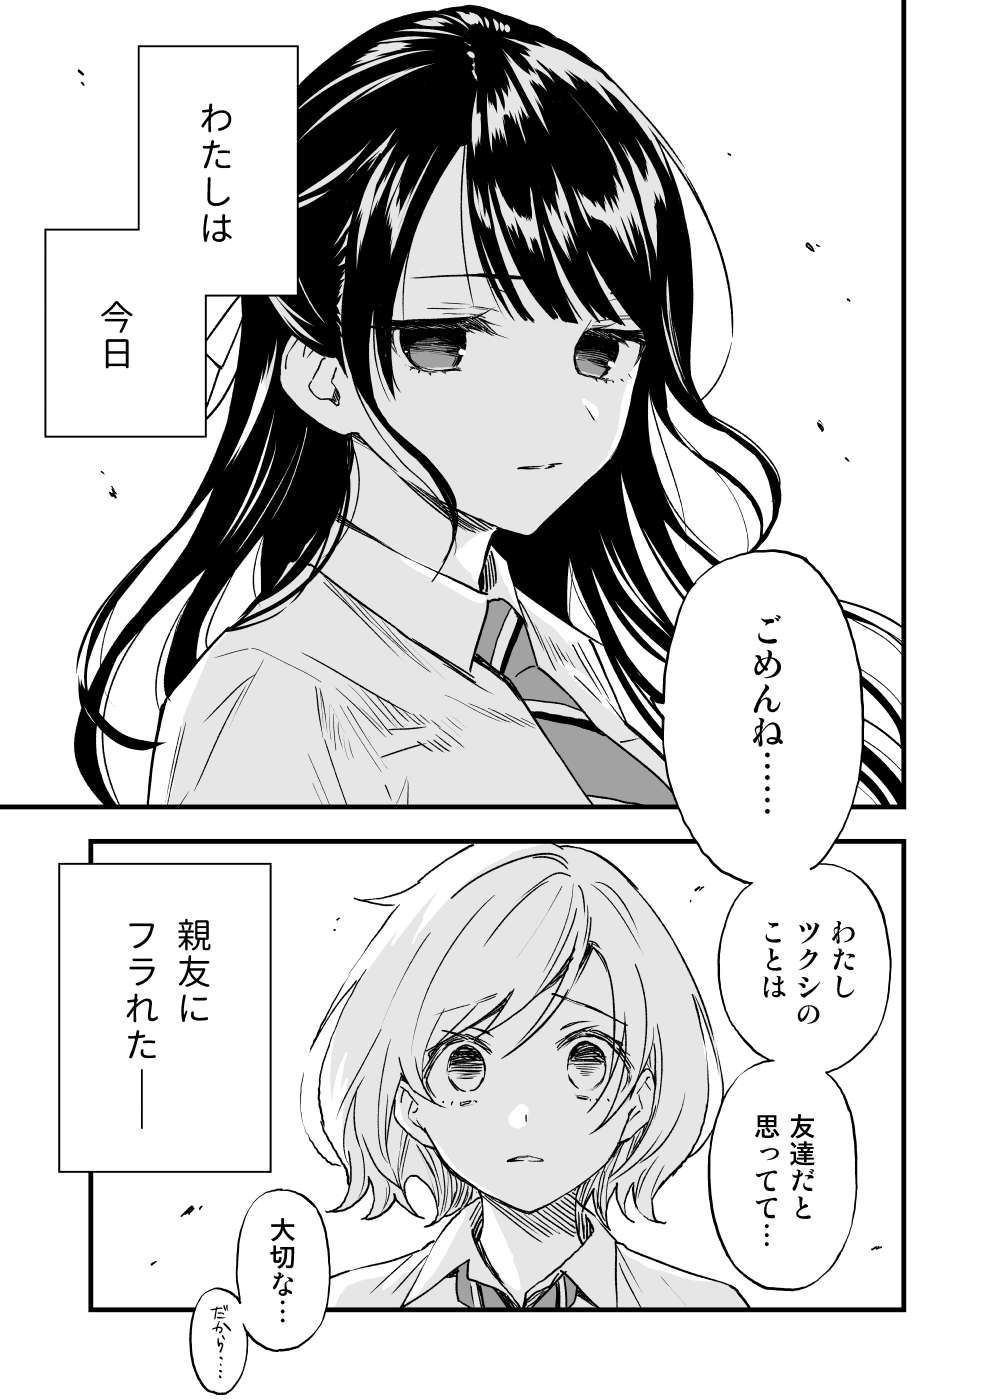 A Yuri Manga That Starts With Getting Rejected in a Dream (Pre-serialization)